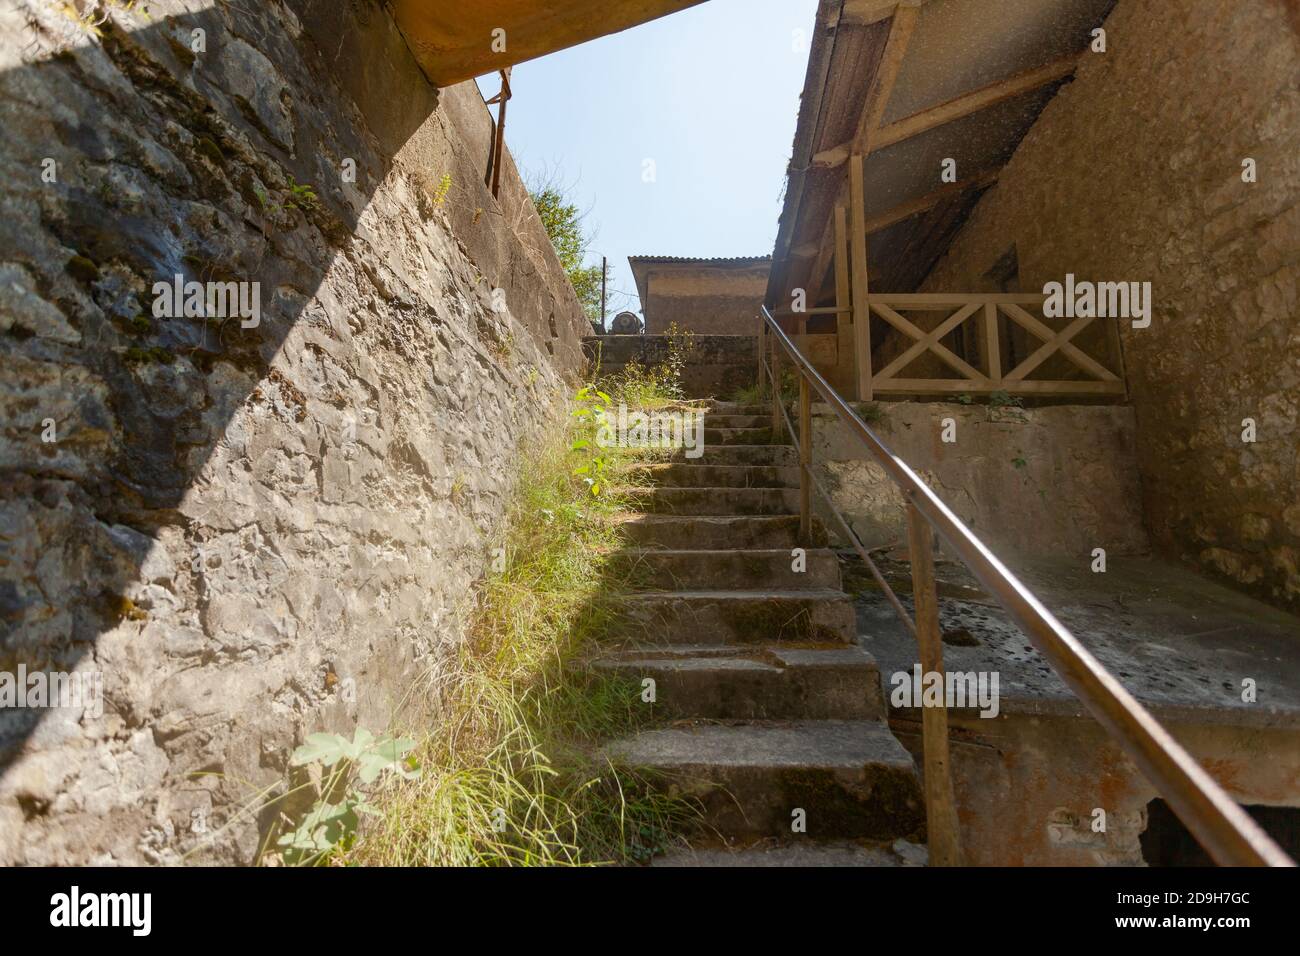 An old stone staircase along the steep wall Stock Photo